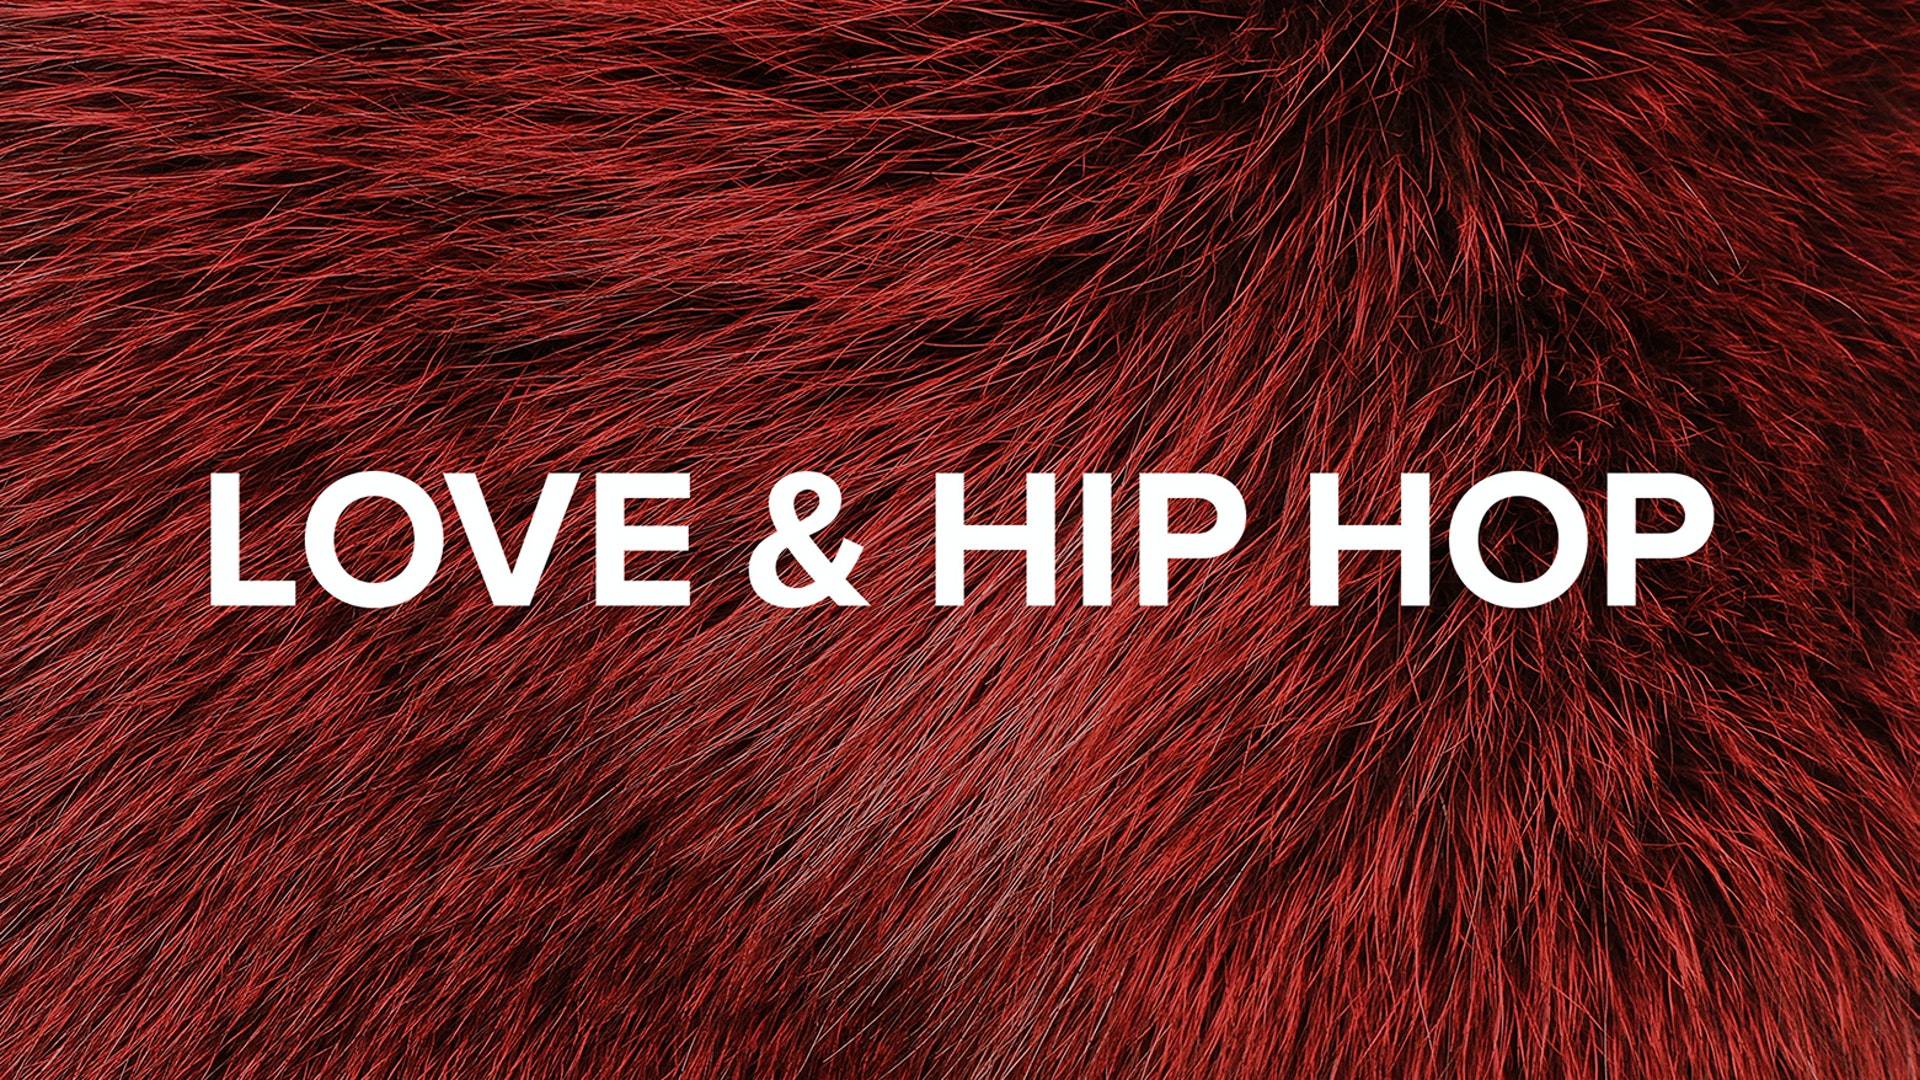 Watch VH1's Love And Hip Hop Channel On Pluto TV